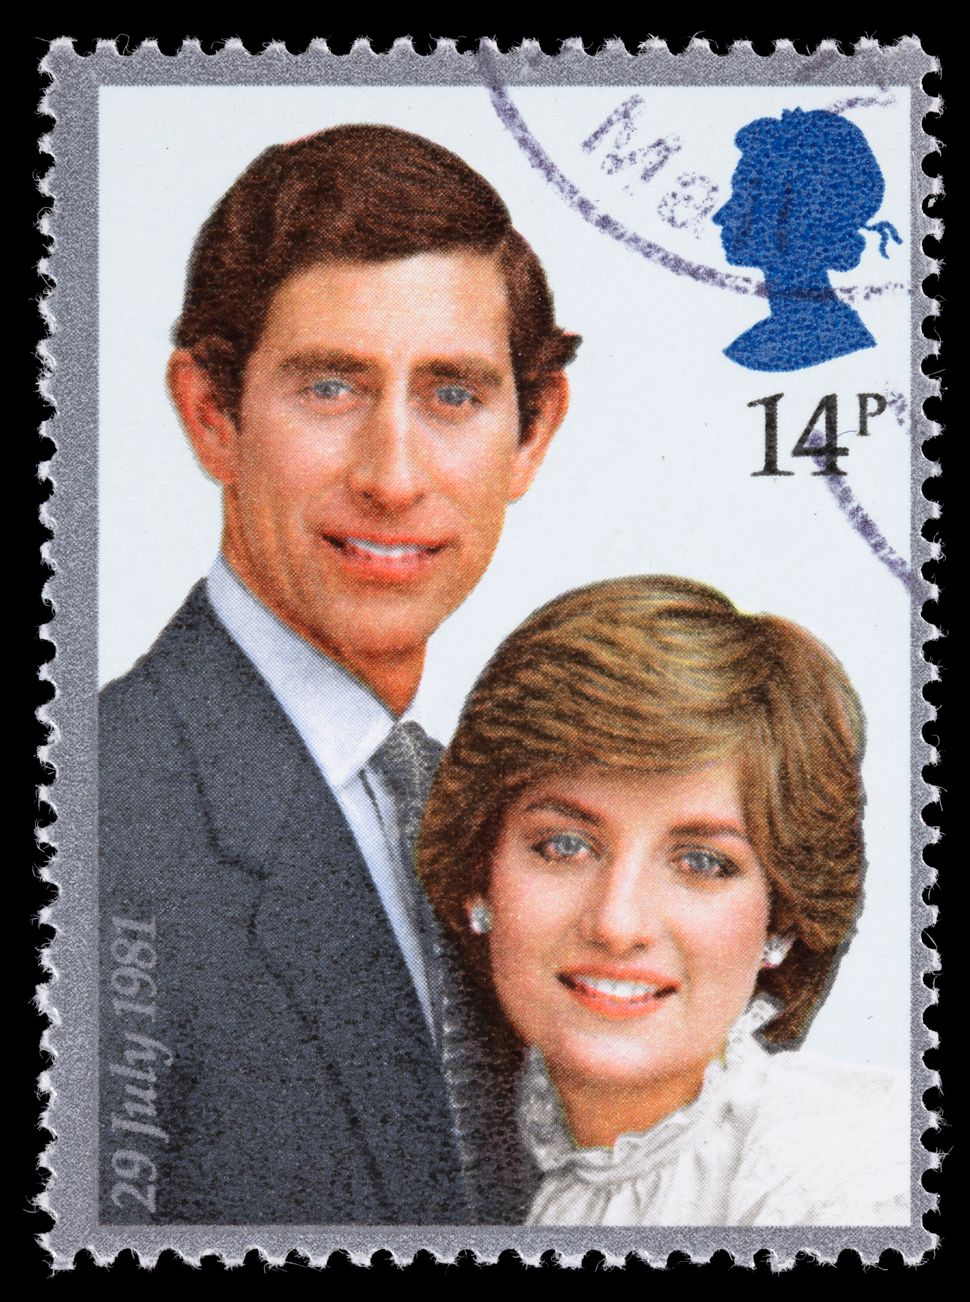 The wedding of Prince Charles of Wales and Lady Diana Spencer, as seen on a stamp of the time.